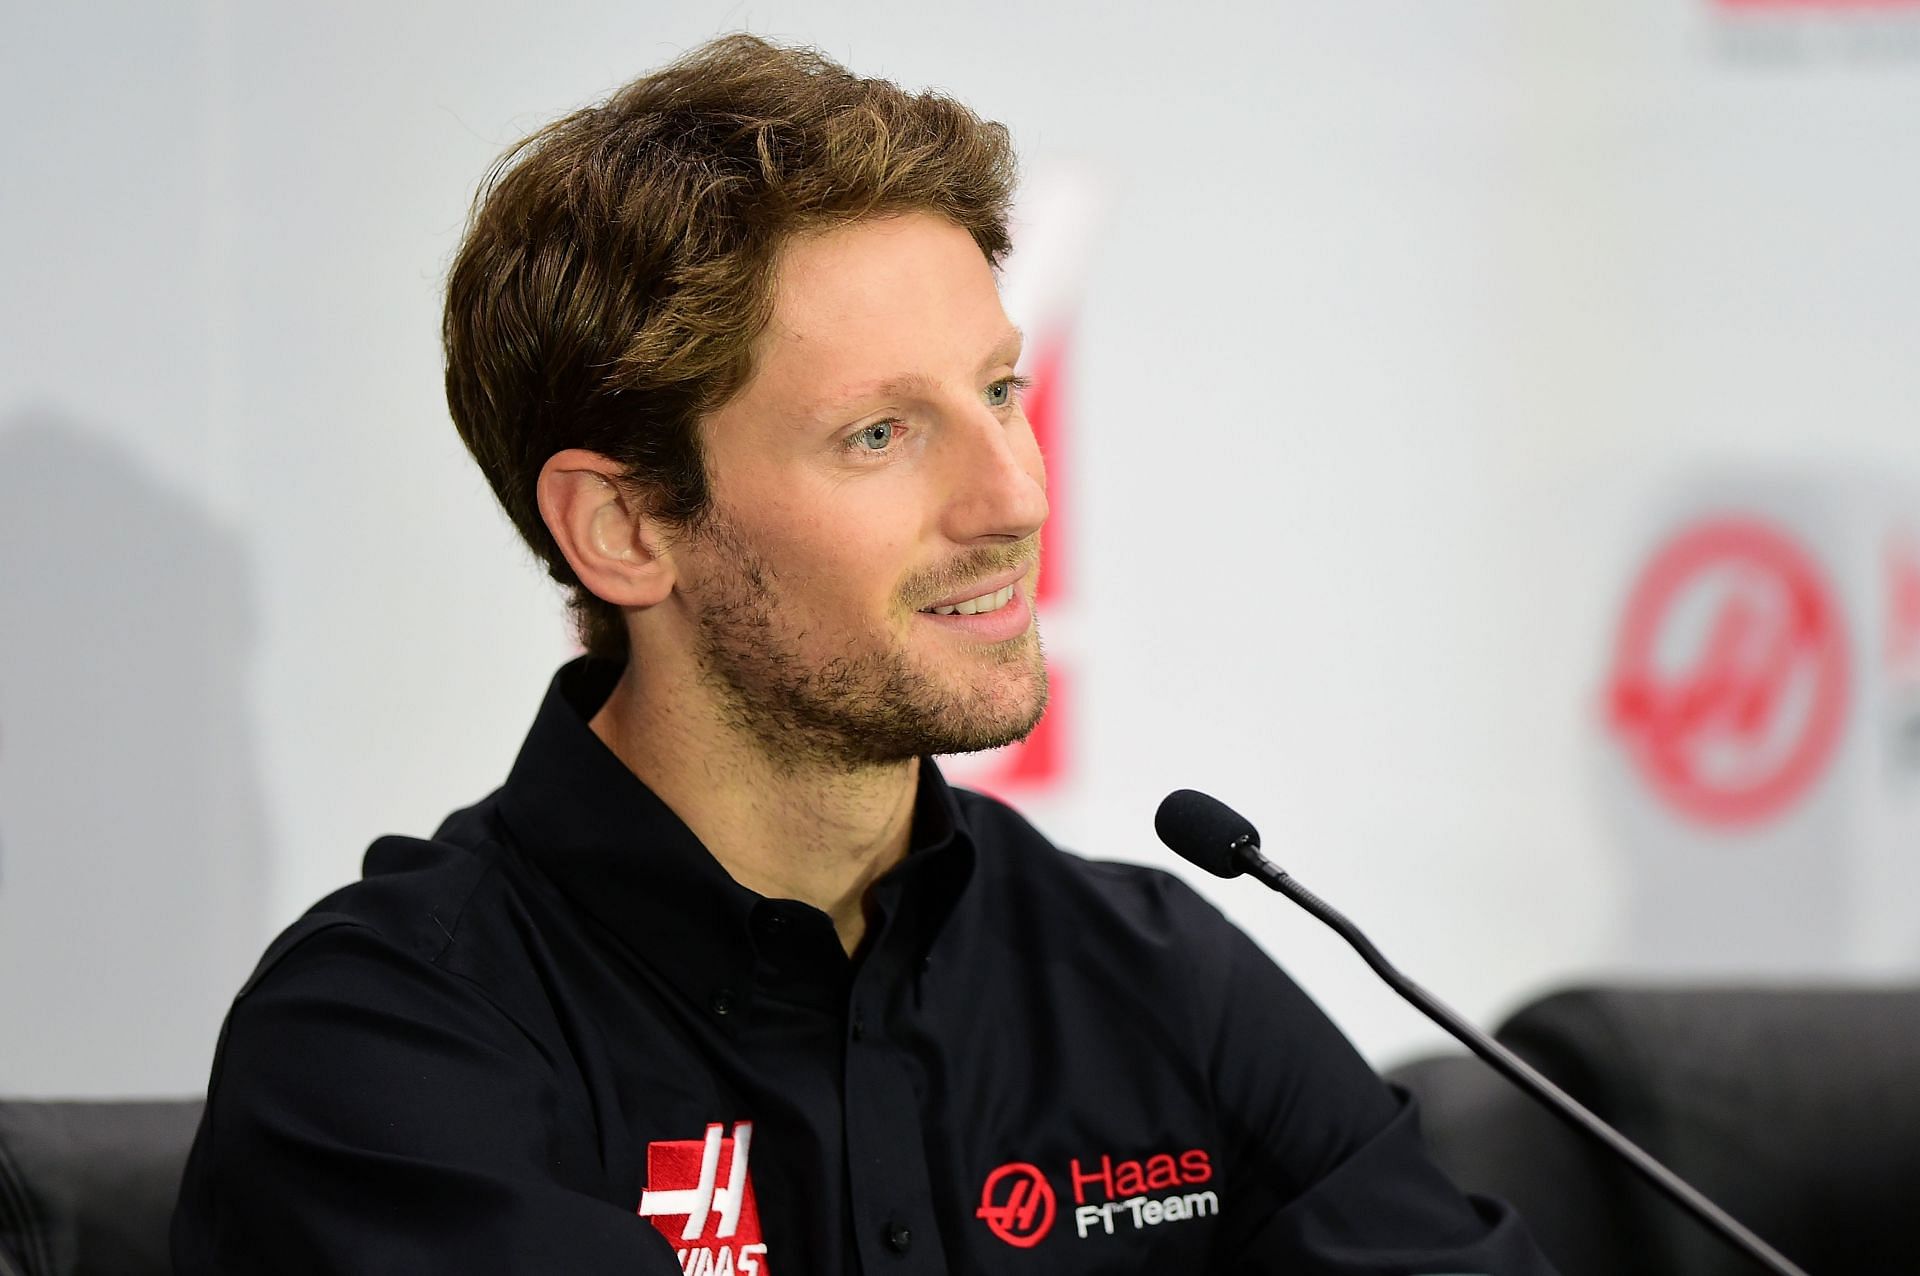 Romain Grosjean believes drivers struggling with porpoising just &quot;have to deal with it&rdquo;